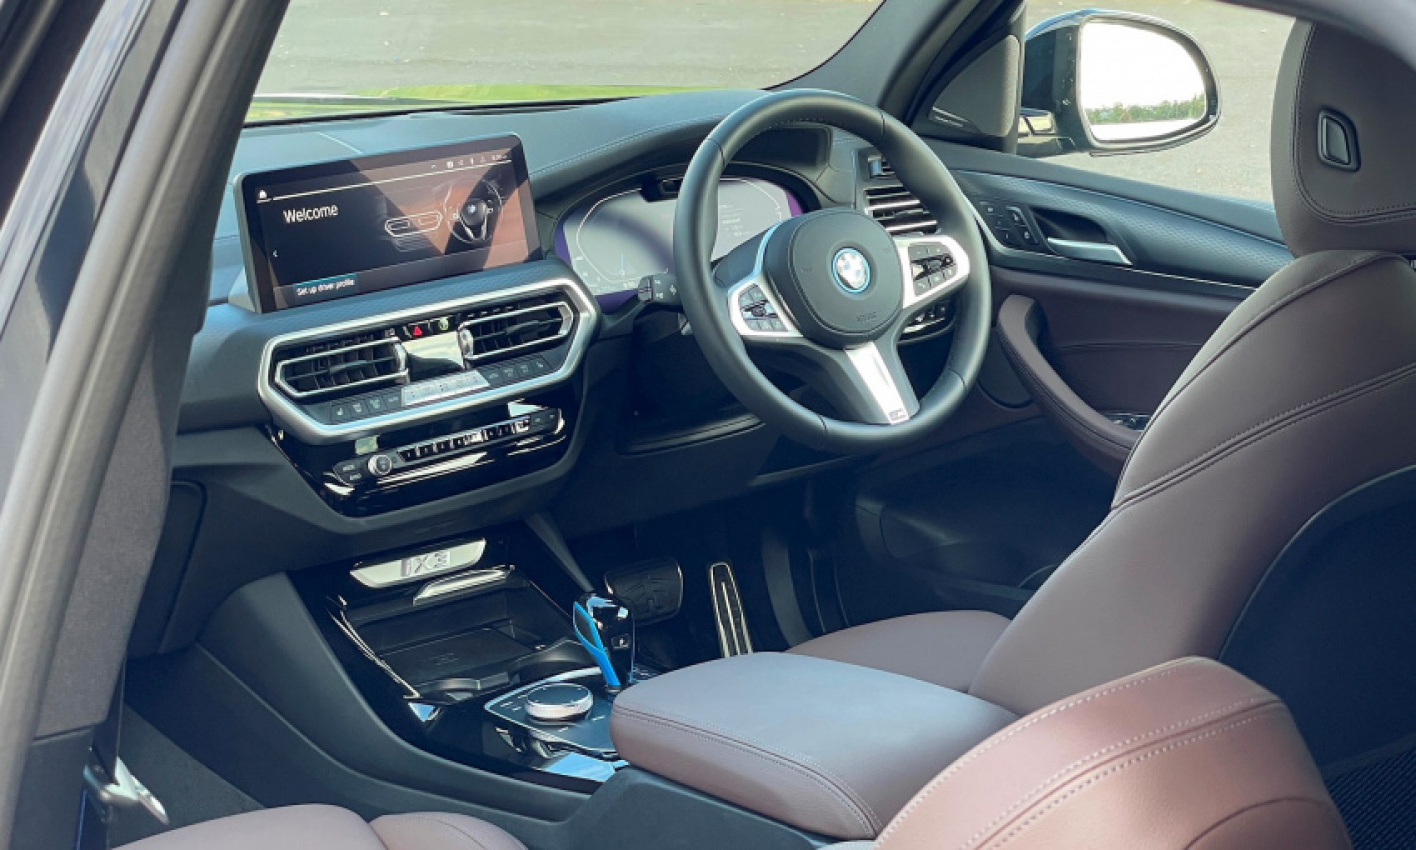 autos, bmw, cars, how to, car, cars, driven, driven nz, electric cars, motoring, national, new zealand, news, nz, reviews, road tests, suv, how to, bmw ix3 review: how to be impressive without being extreme